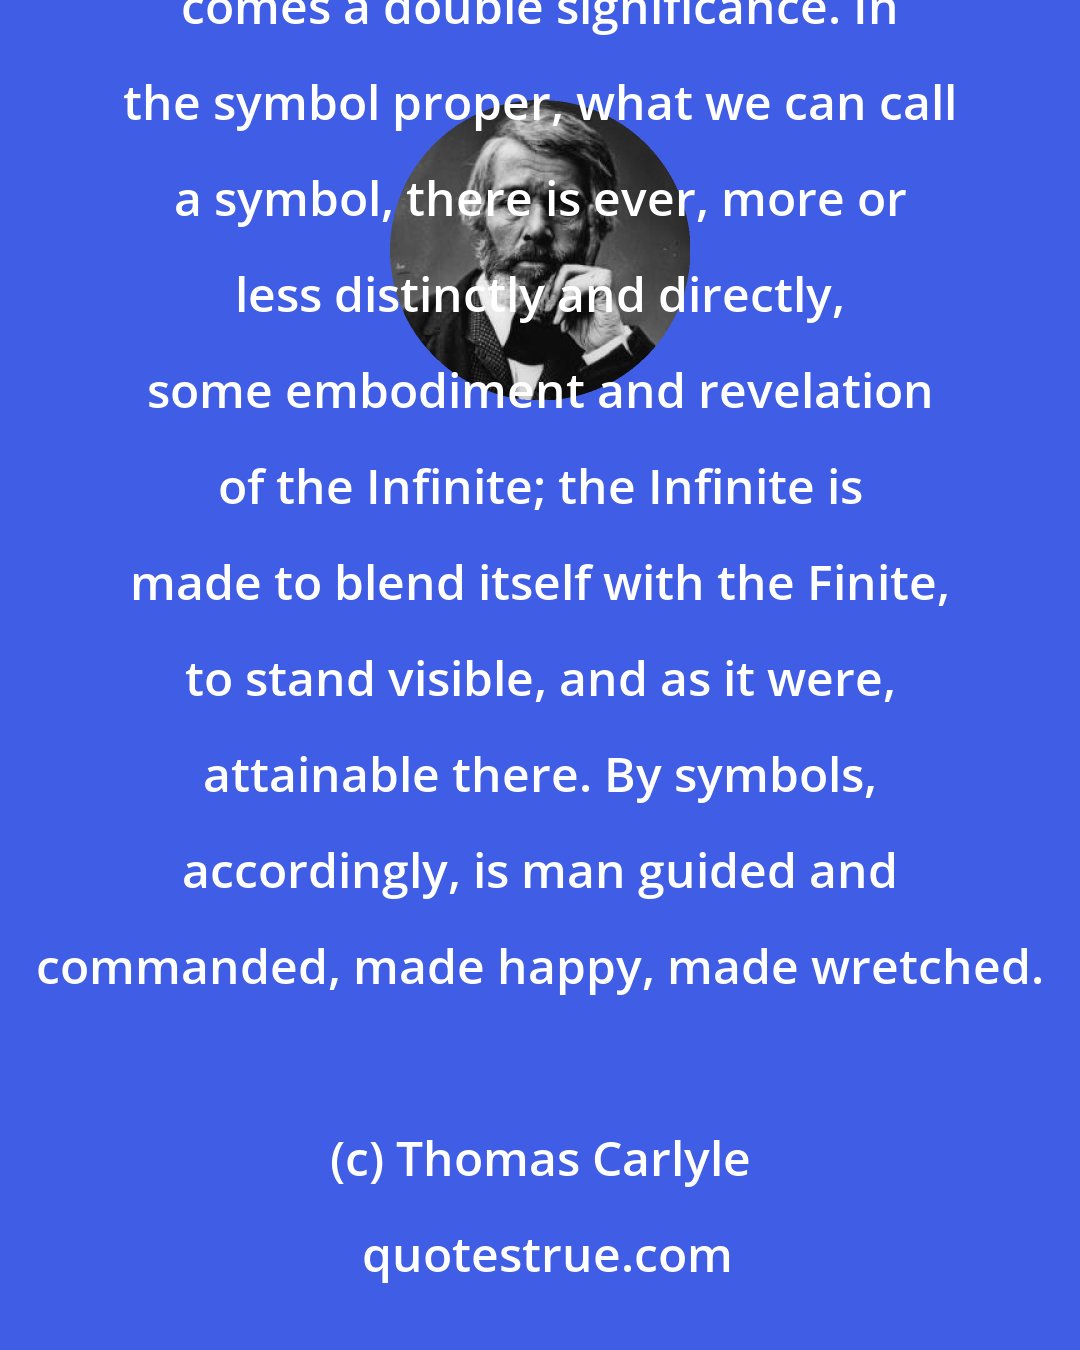 Thomas Carlyle: In a symbol there is concealment and yet revelation: here therefore, by silence and by speech acting together, comes a double significance. In the symbol proper, what we can call a symbol, there is ever, more or less distinctly and directly, some embodiment and revelation of the Infinite; the Infinite is made to blend itself with the Finite, to stand visible, and as it were, attainable there. By symbols, accordingly, is man guided and commanded, made happy, made wretched.